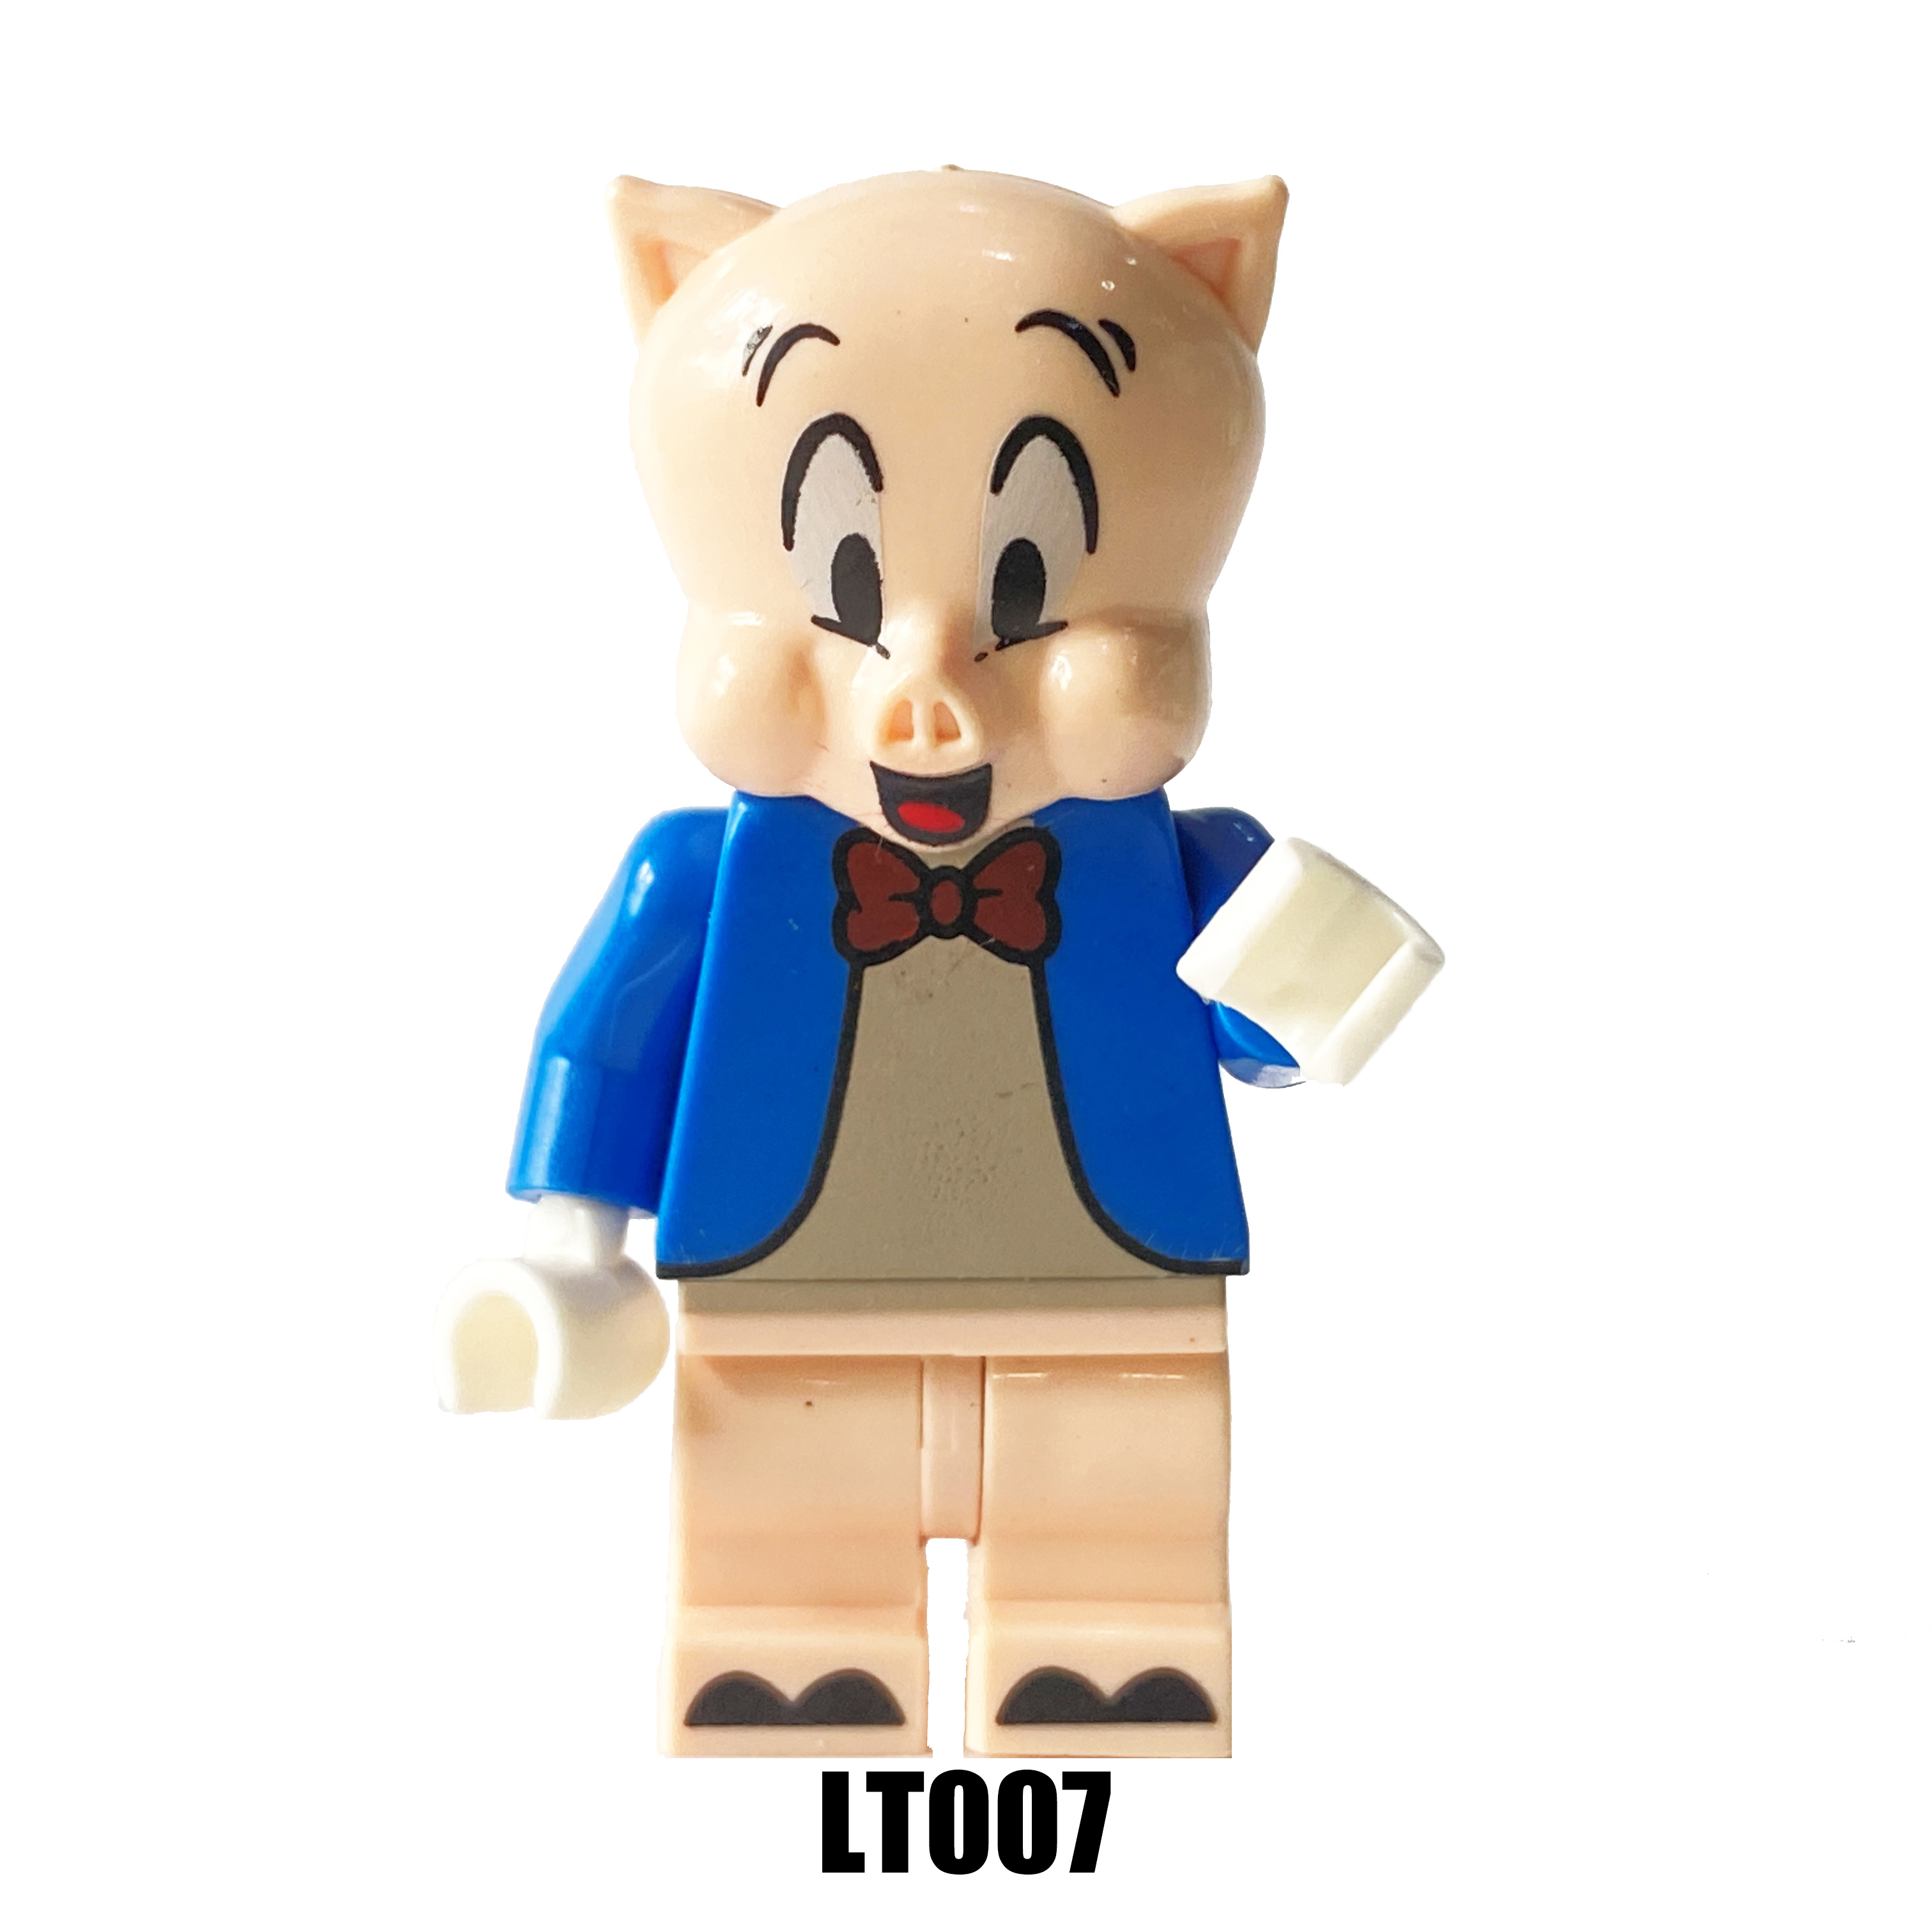 LT001 LT002 LT003 LT004 LT005 LT006 LT007 LT008 LT009 LT010 LT011 LT012 LT1001 LT1002 Looney Tunes Cartoon Series Characters Toys Building Block for Kids Gifts 